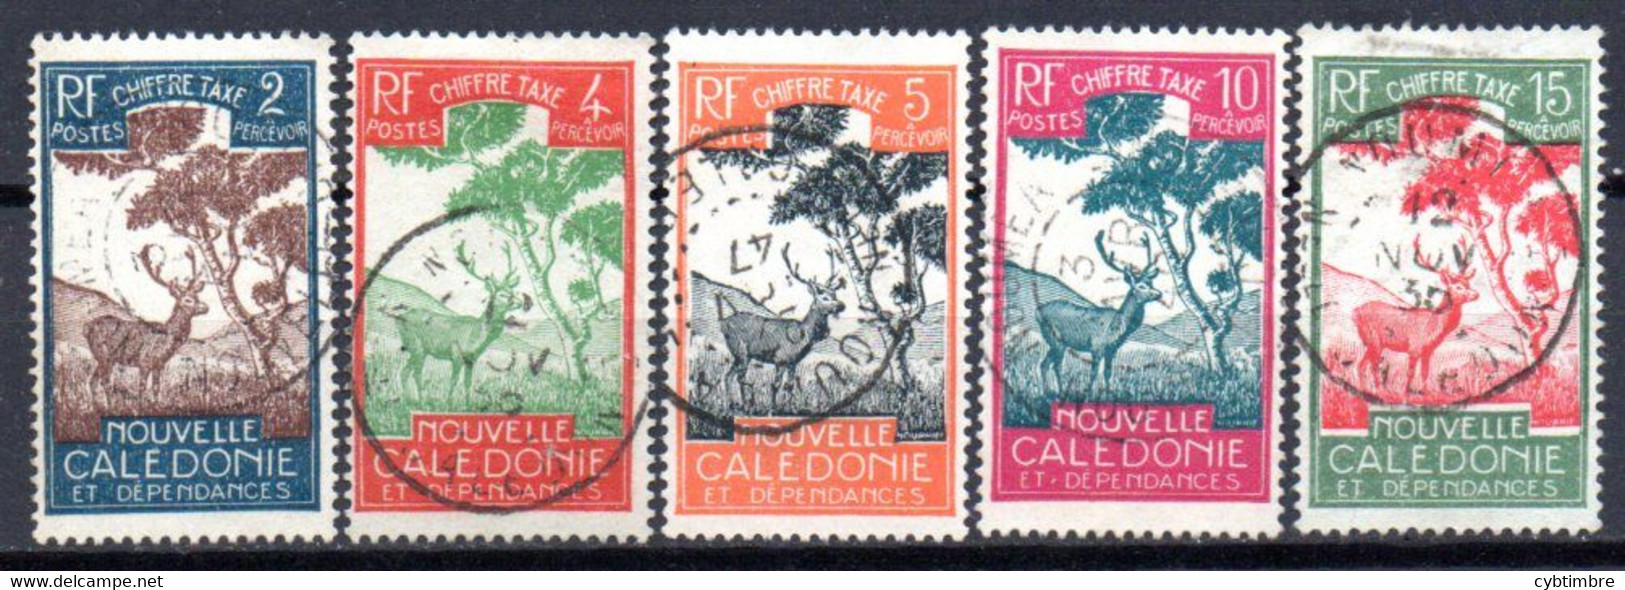 Nouvelle Caledonie: Yvert N° Taxe 26/30 - Postage Due